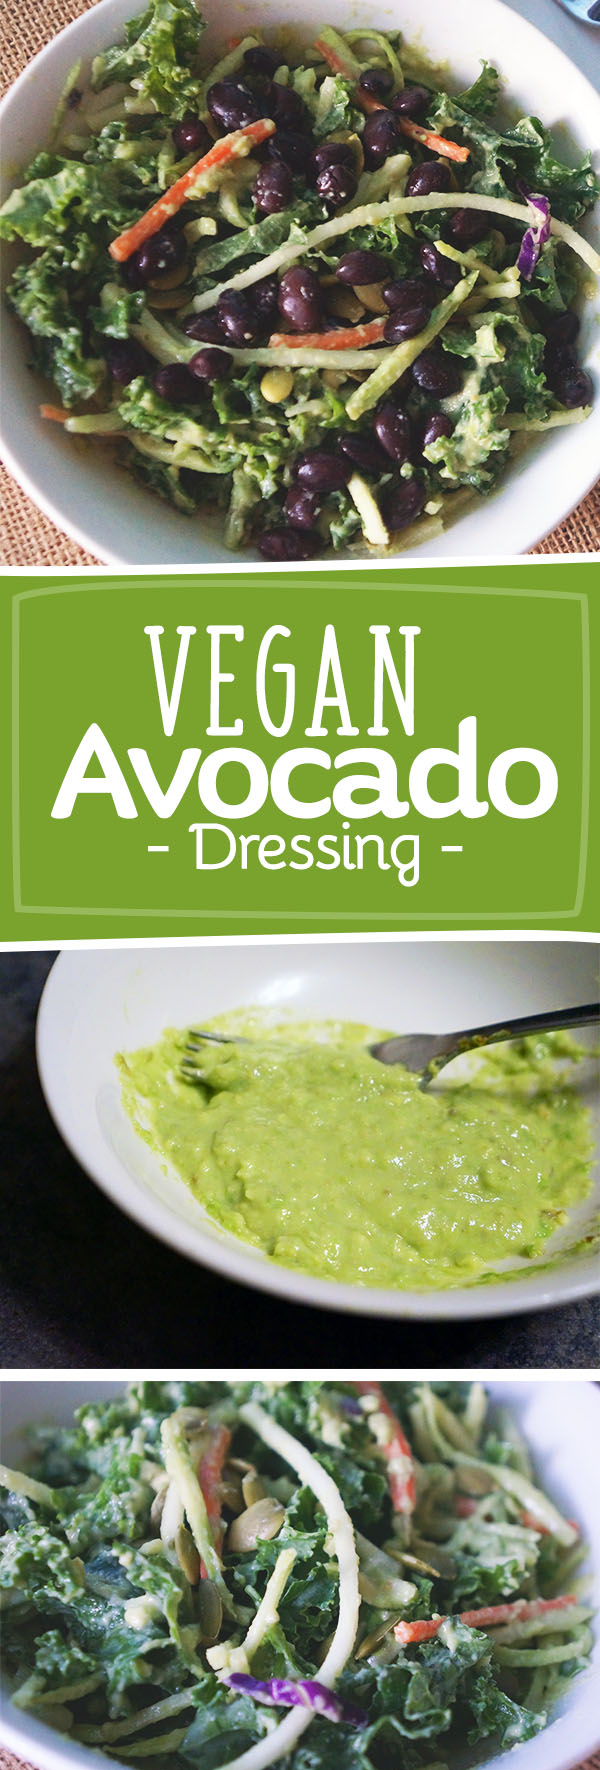 Healthy Vegan Avocado Dressing recipe and kale slaw - great way to add some healthy fats and flavor